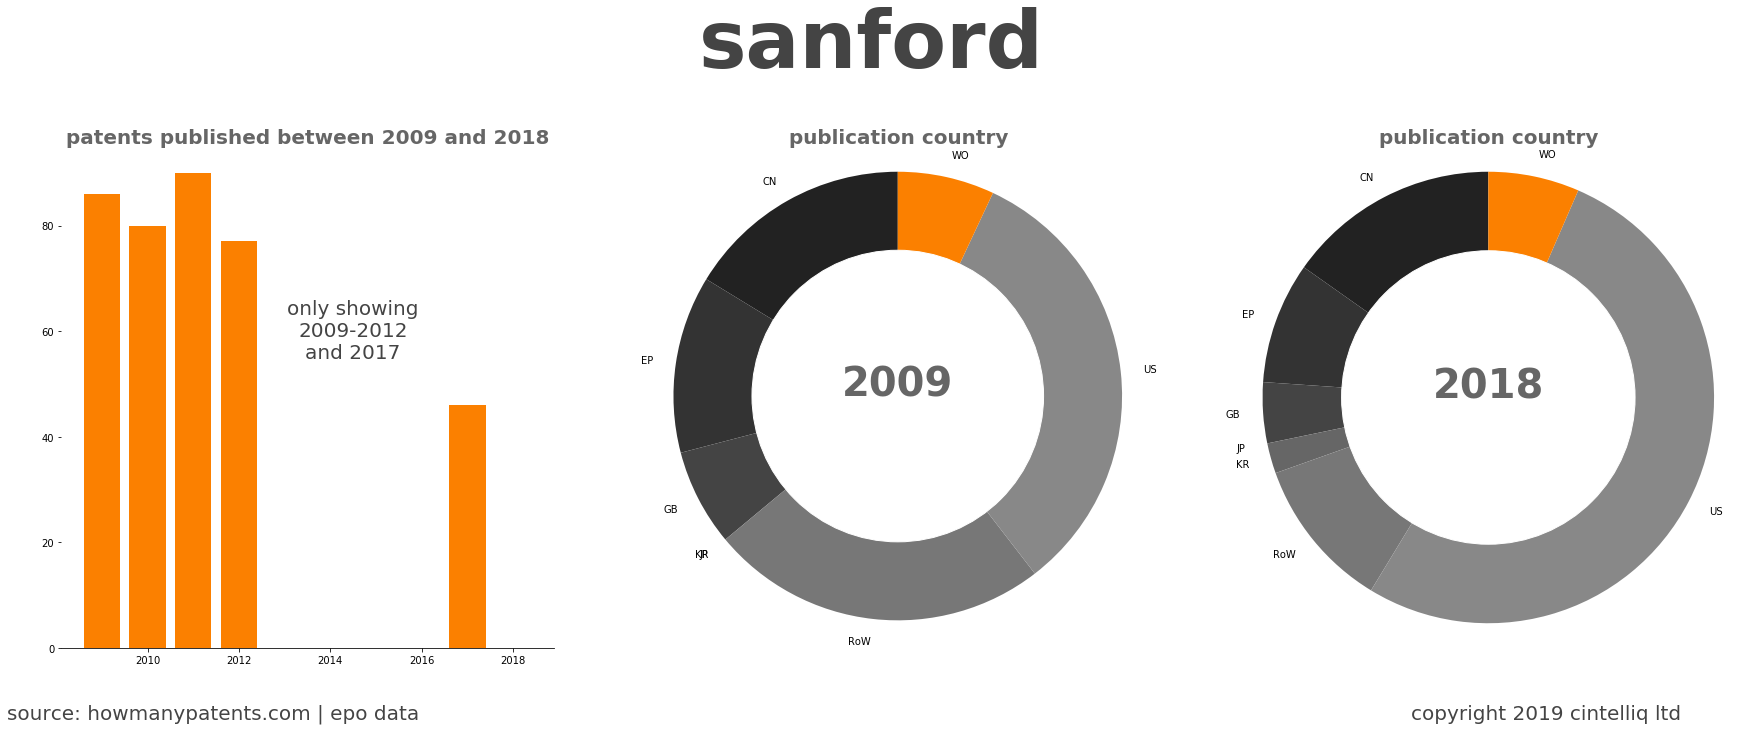 summary of patents for Sanford